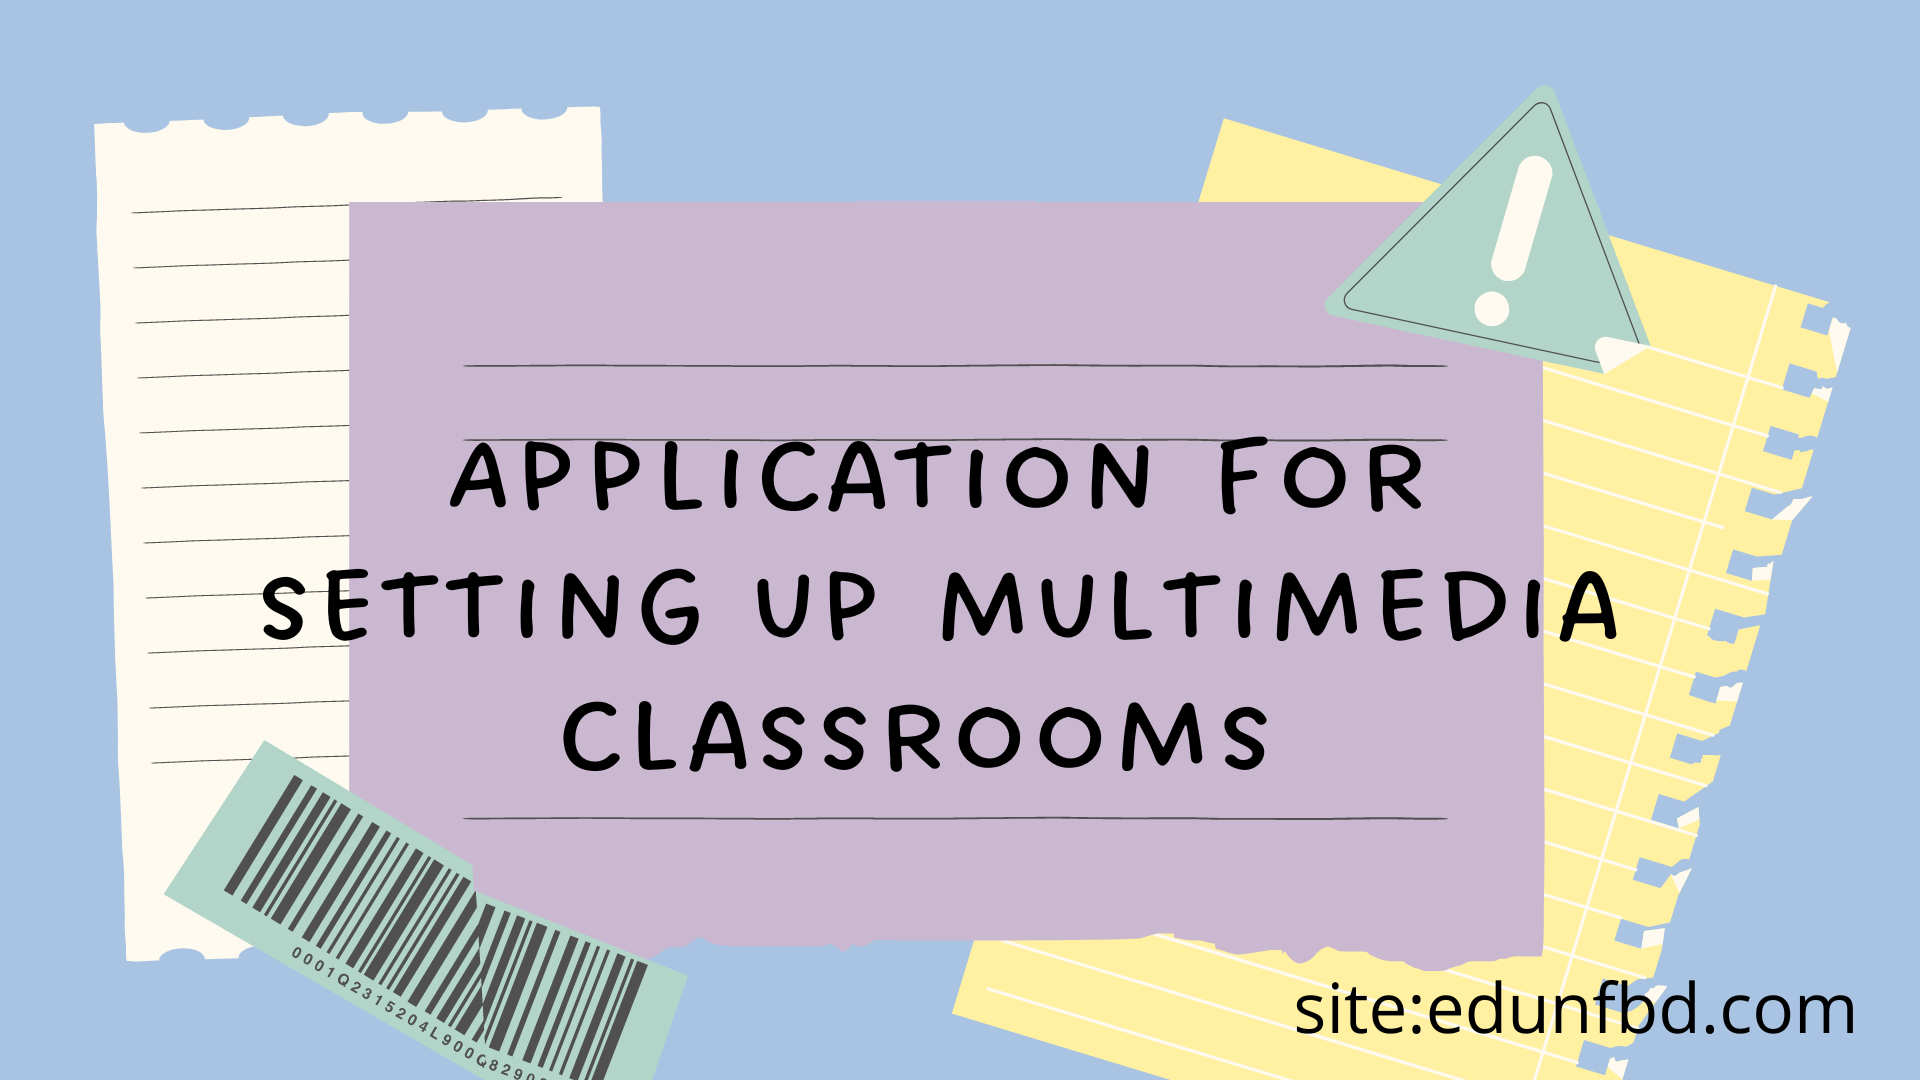 Application for setting up multimedia classrooms